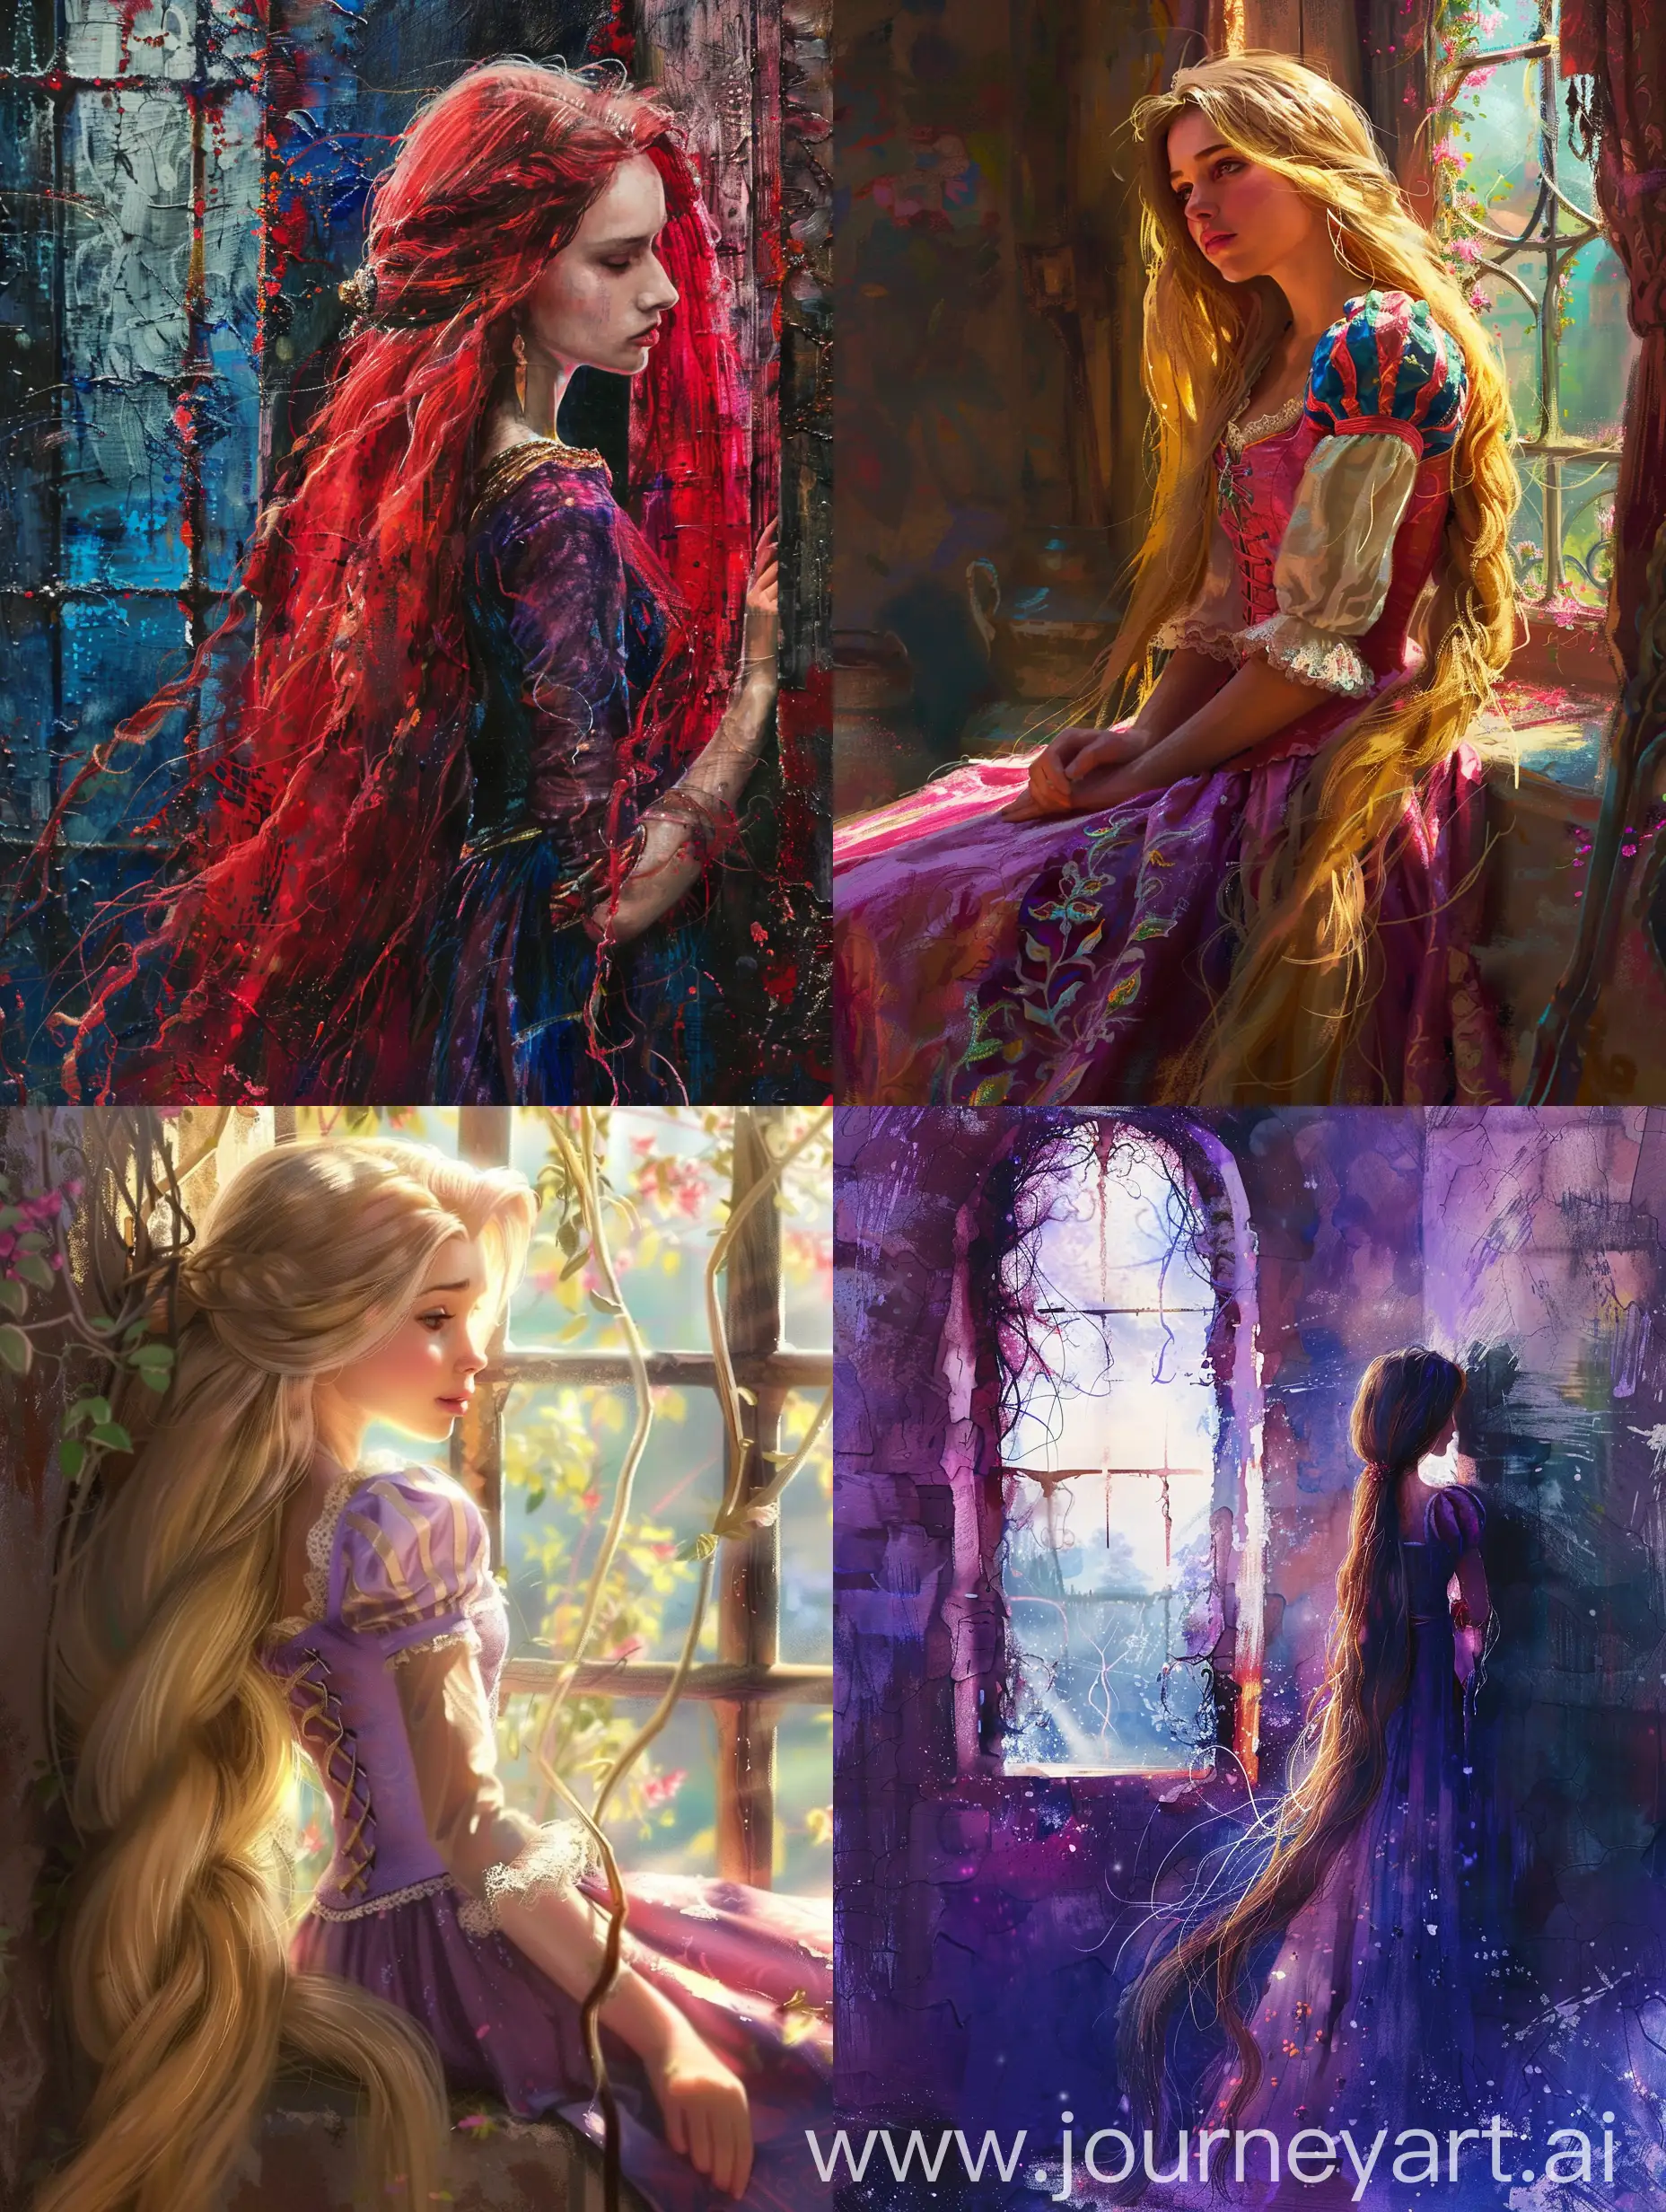 Princess-Rapunzel-at-Tower-Window-with-Flowing-Hair-in-Vicente-Romero-Style